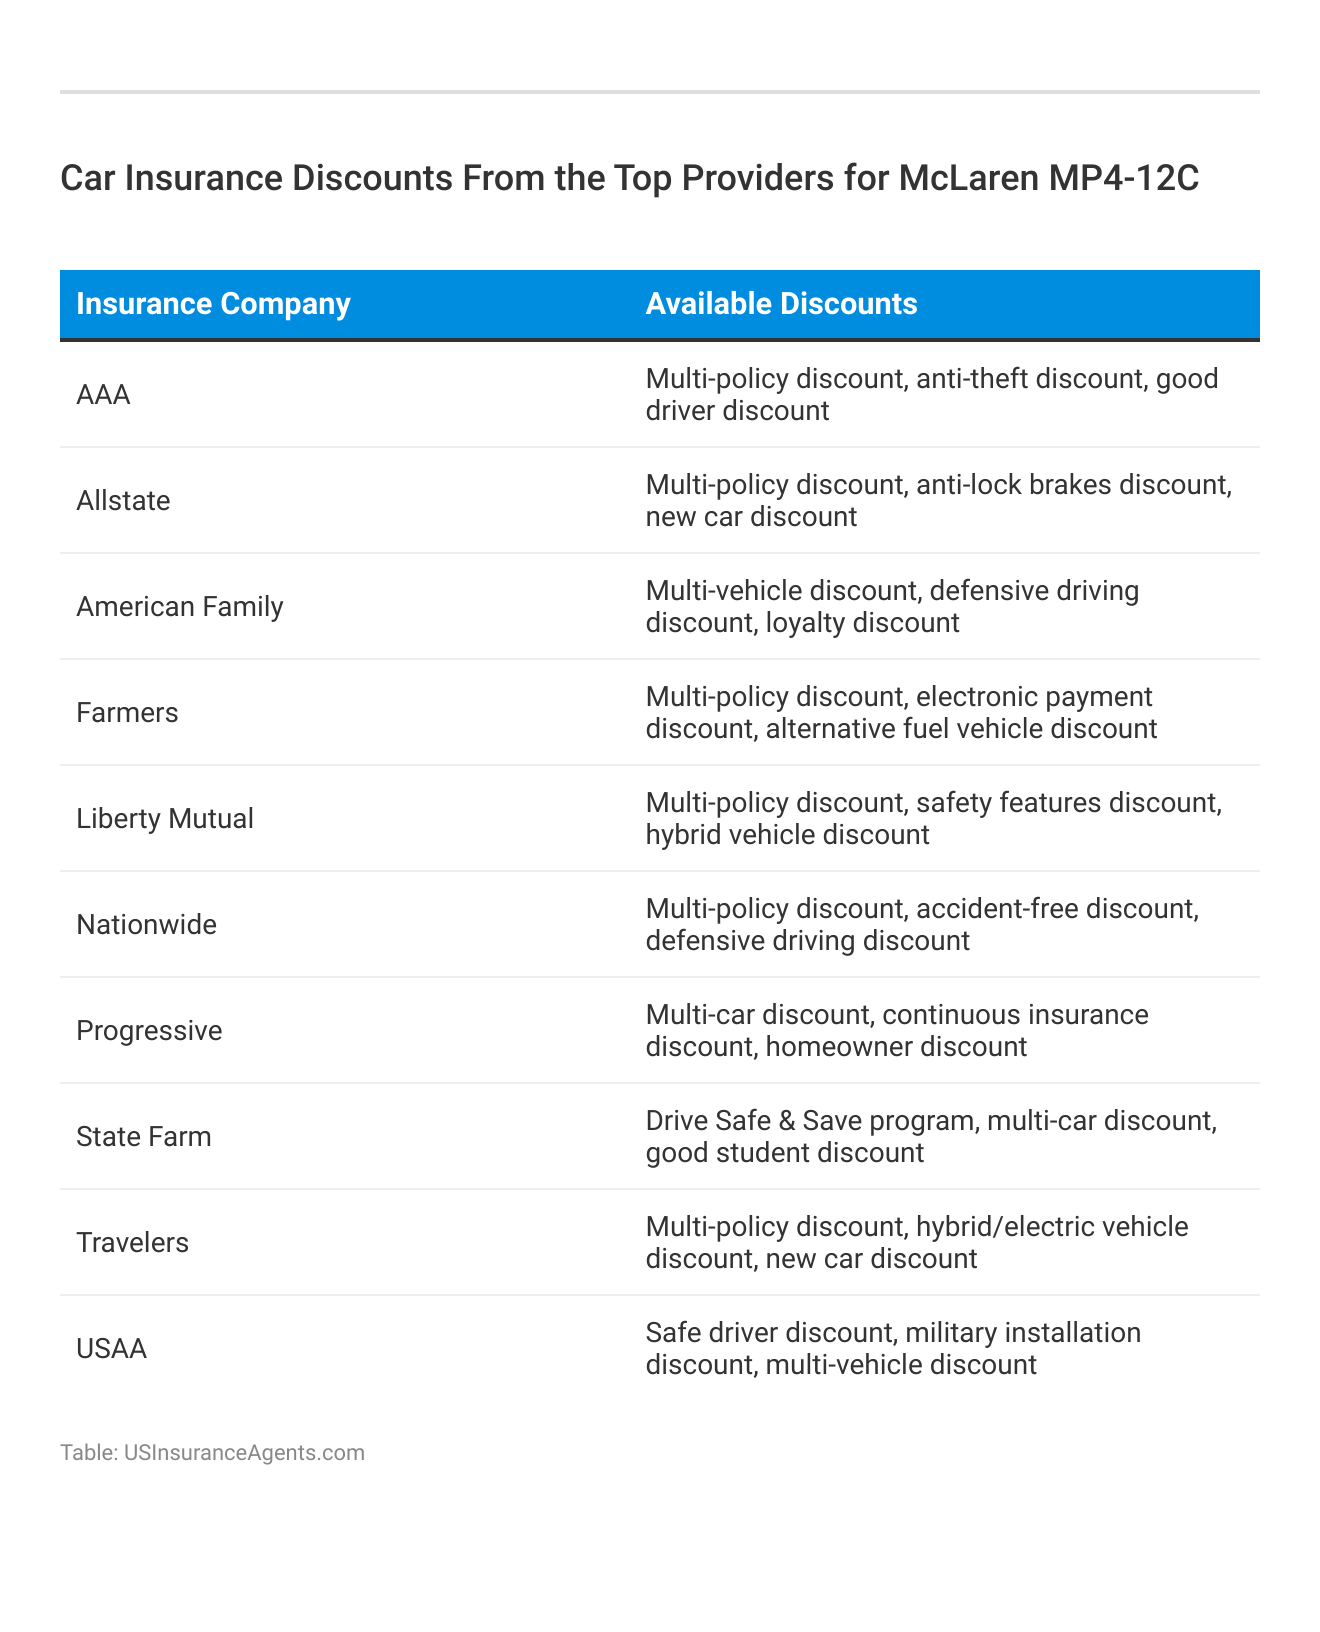 <h3>Car Insurance Discounts From the Top Providers for McLaren MP4-12C</h3>